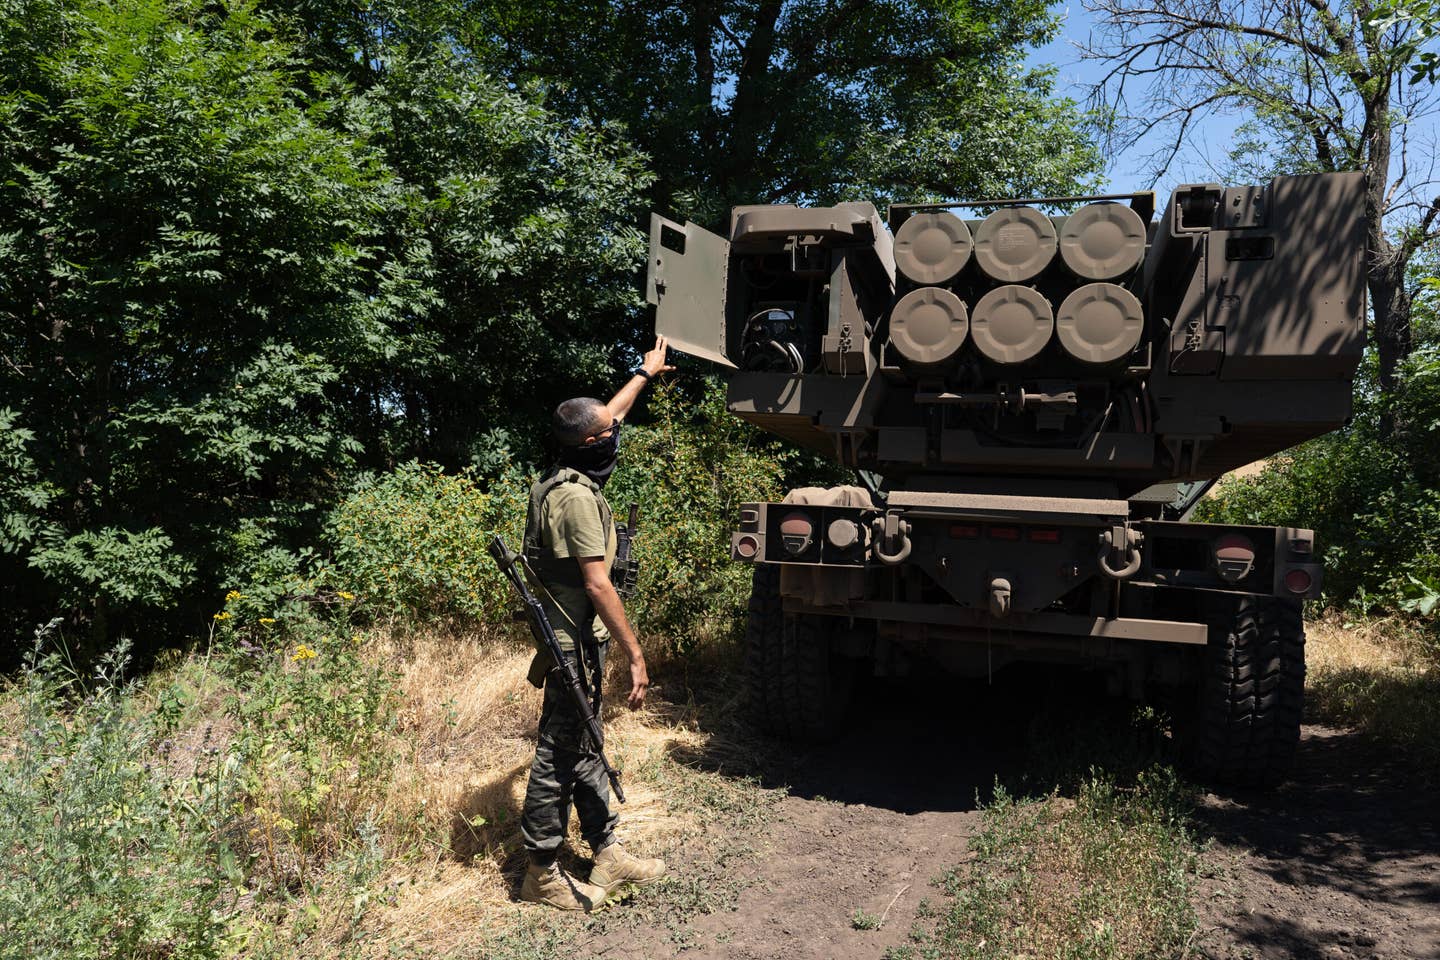 Kuzia, the commander of the unit, shows the Guided Multiple Launch Rocket Systems (GMLRS) munitions on an M142 High Mobility Artillery Rocket Systems or HIMARS in Eastern Ukraine. (Photo by Anastasia Vlasova for The Washington Post via Getty Images)